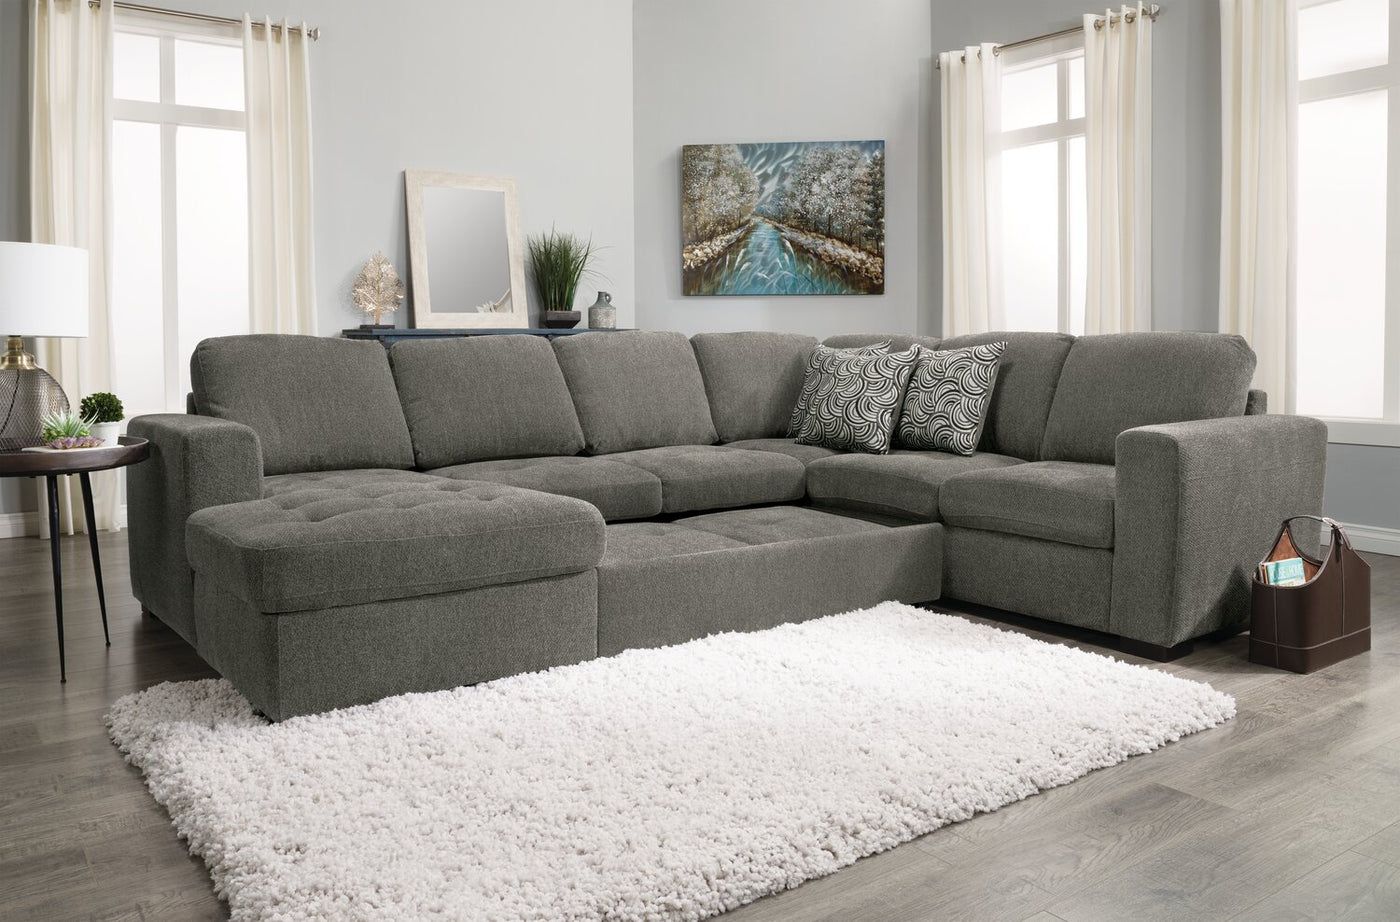 Izzy 4 Piece Chenille Sleeper Sectional With Left Facing Storage Ch Throughout Chenille Sectional Sofas (View 19 of 20)